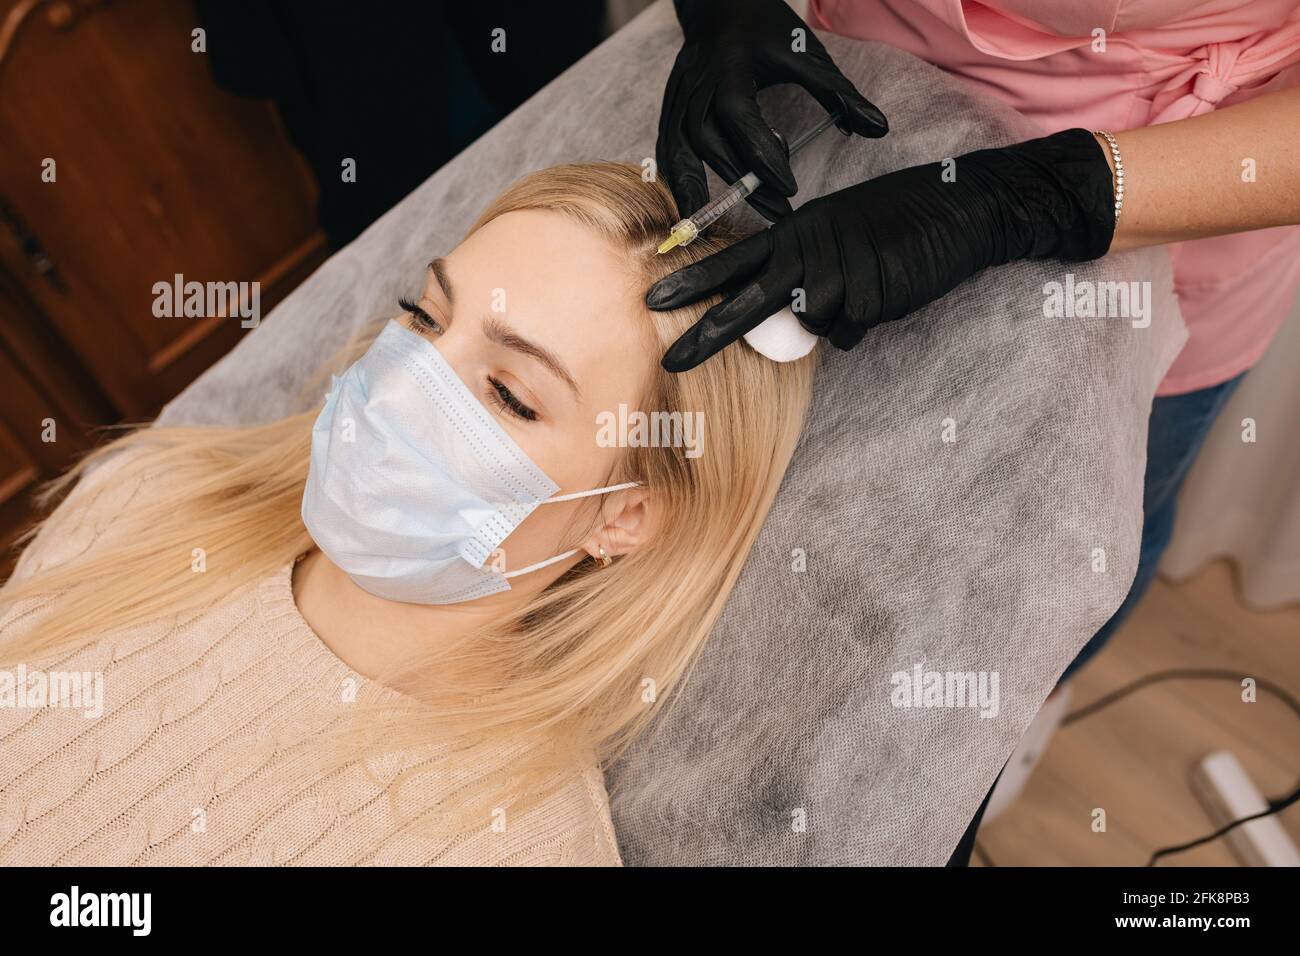 Beautician gloves gives injection into the head of blonde woman. Mesotherapy, hair loss therapy. Hair restoration concept. Stock Photo